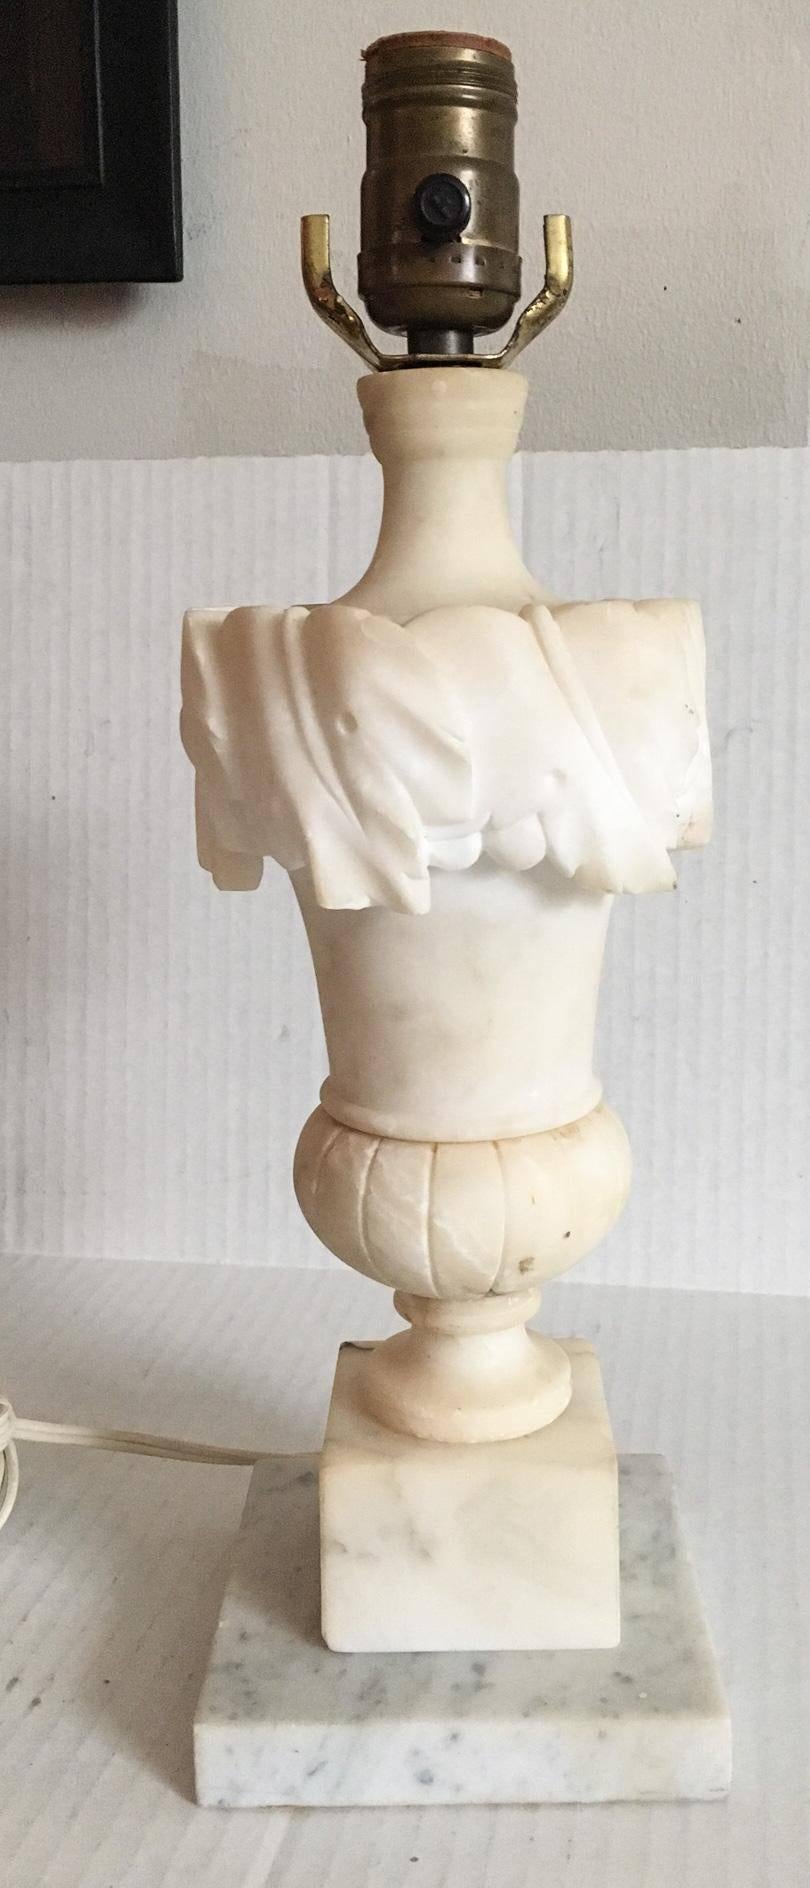 Offered is a stunning, 1930s, Italian, heavy solid carved alabaster lamp in the shape of a classical urn on a square marble base. Lamp retains its original finial as shown, and comes with the shown 8.5